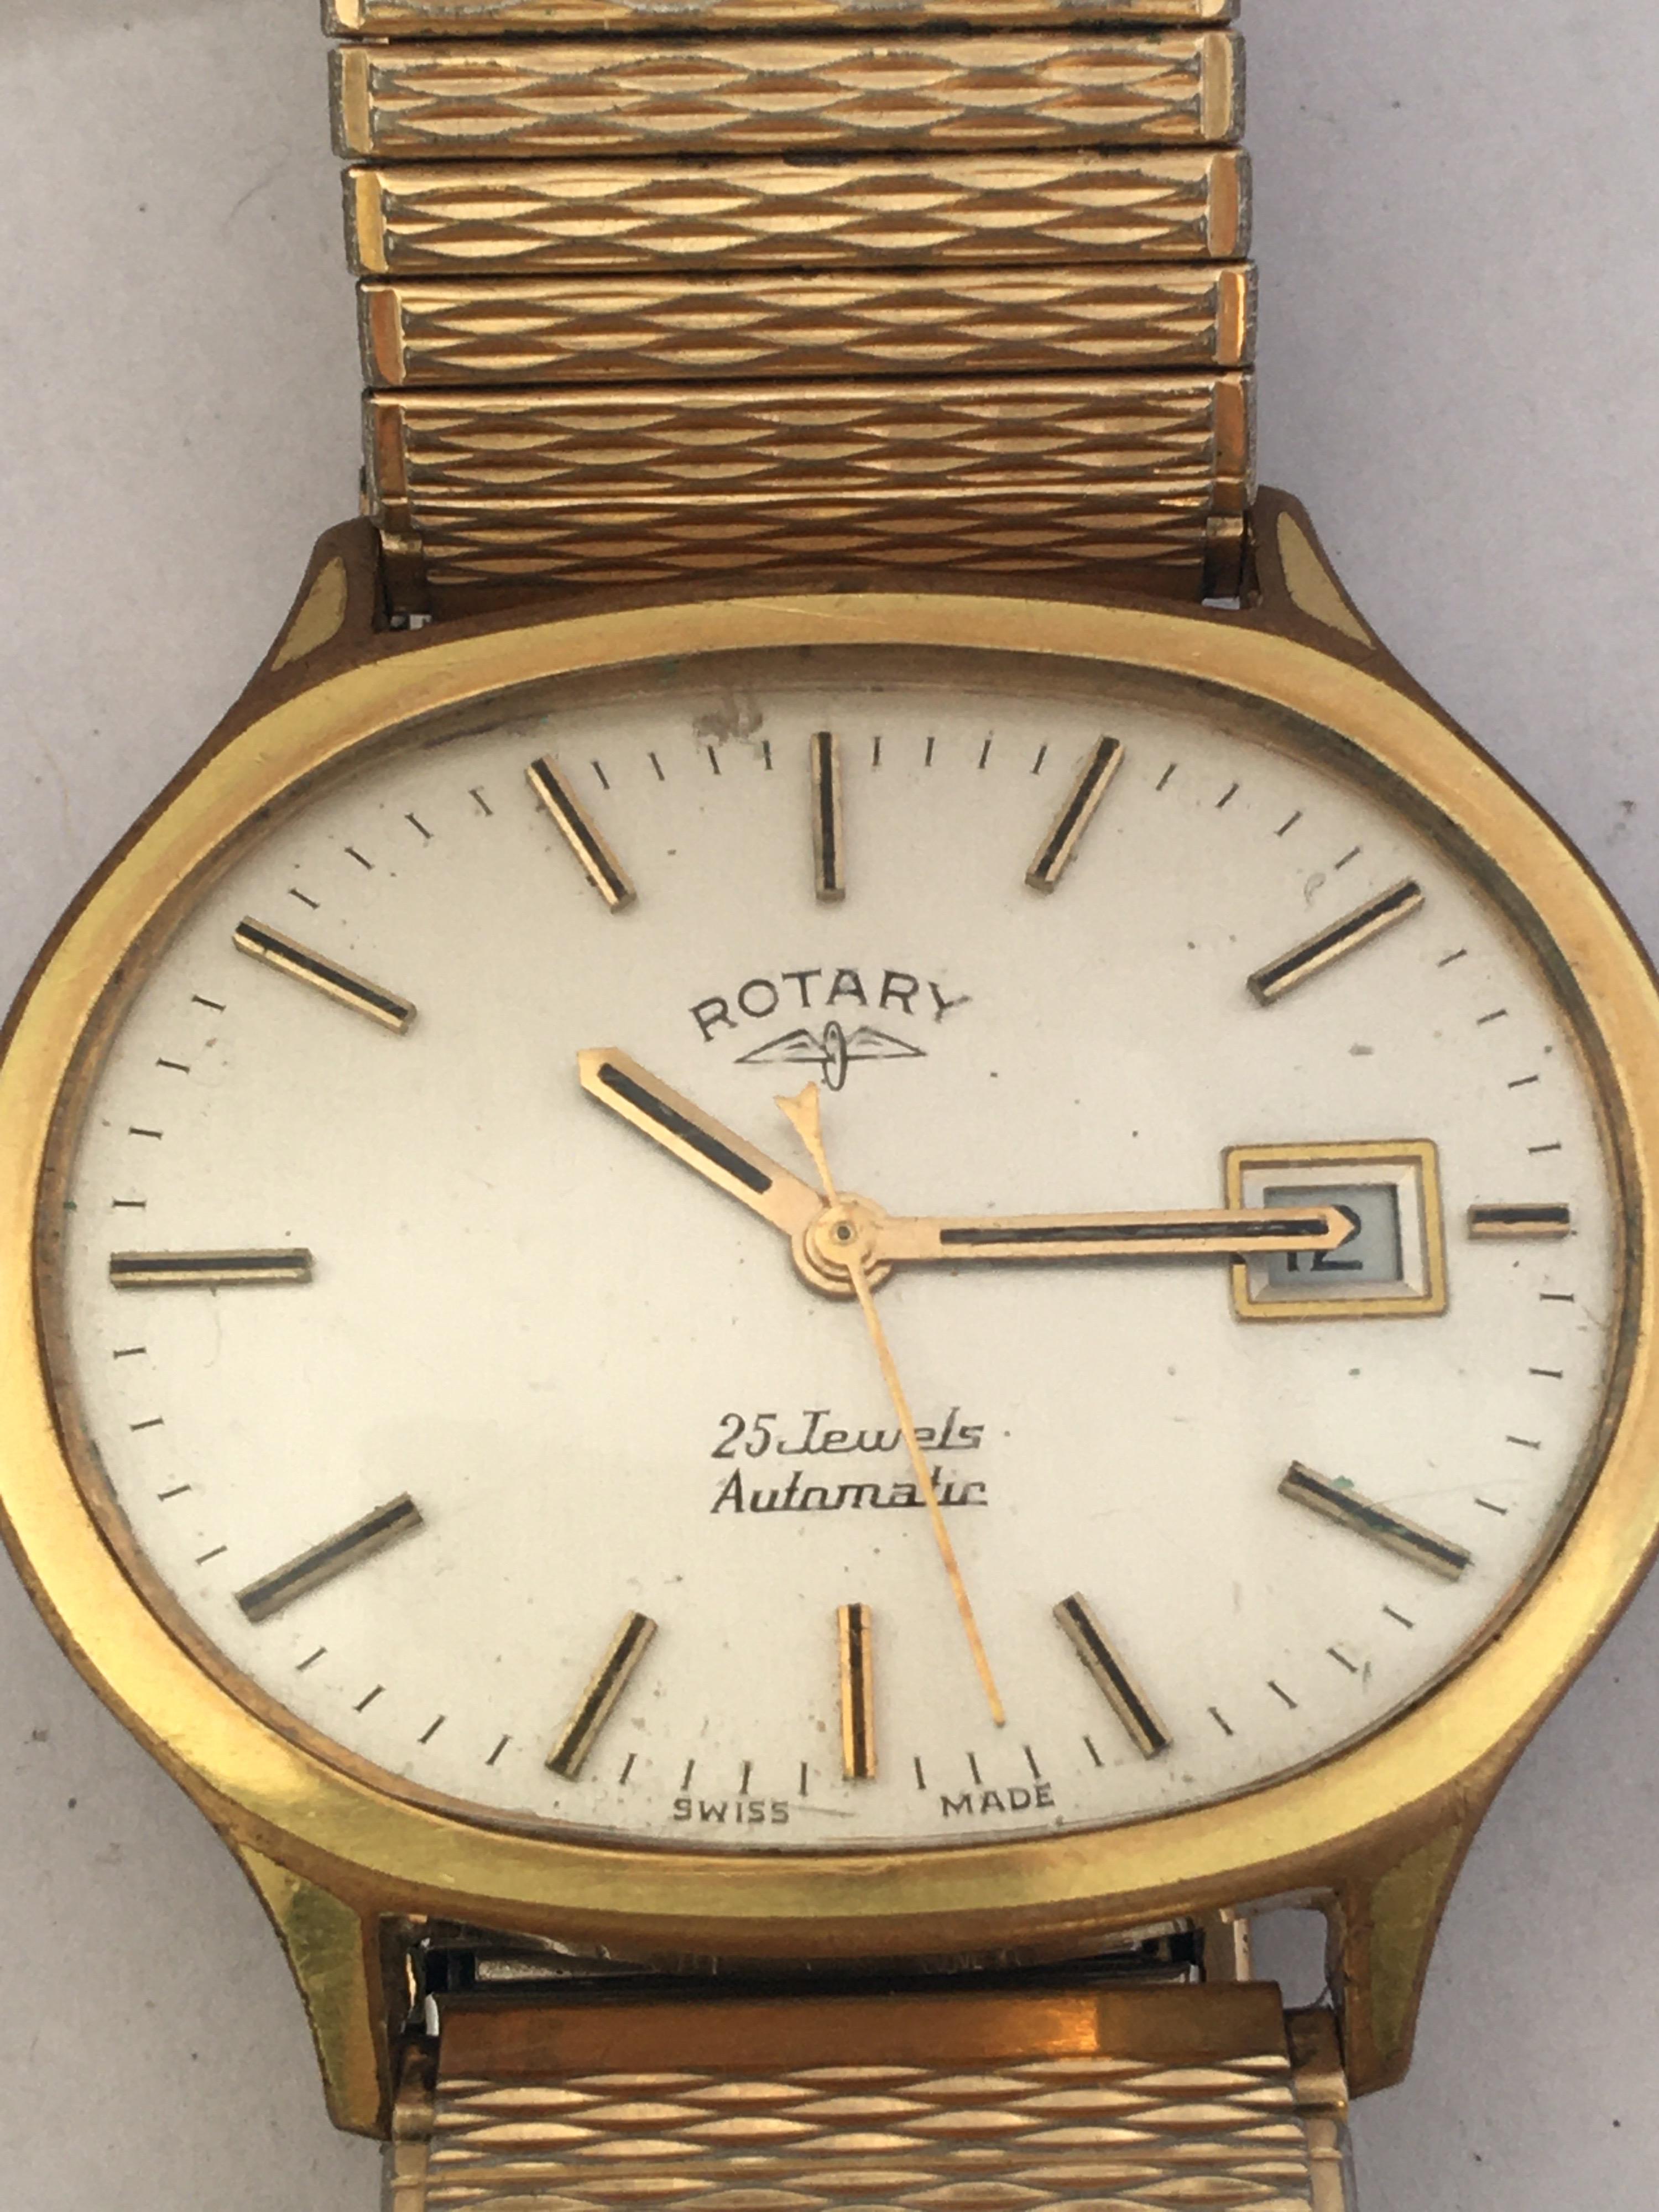 Vintage 1970s Gold-Plated/ Stainless Steel Back ROTARY 25 Jewels Automatic Watch 3